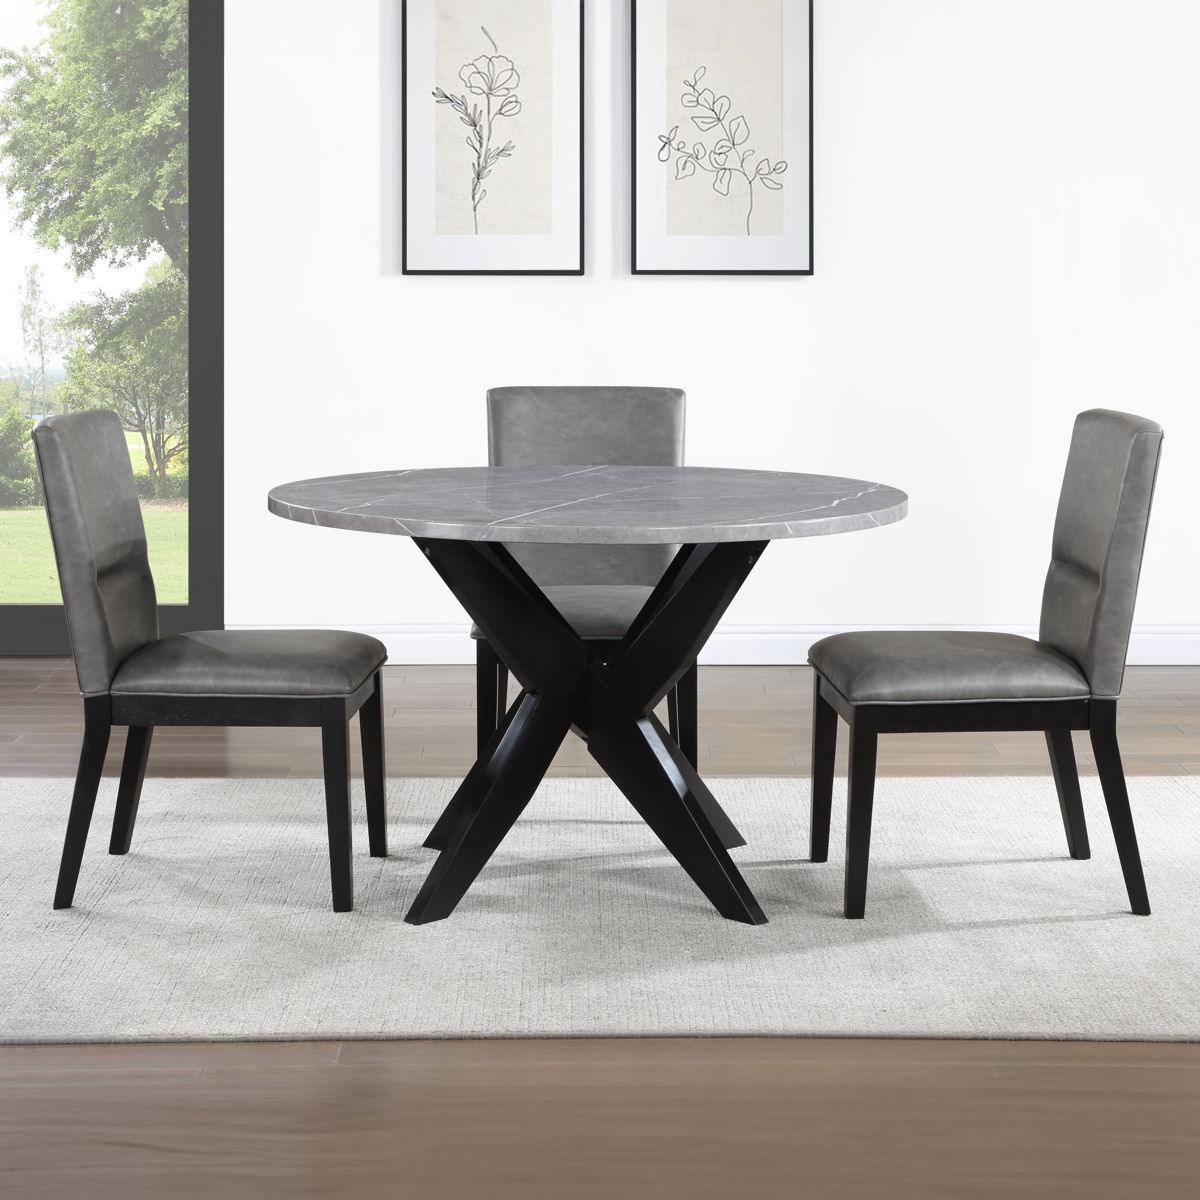 Steve Silver Furniture - Amy - 5 Piece Dining Set - Gray - 5th Avenue Furniture